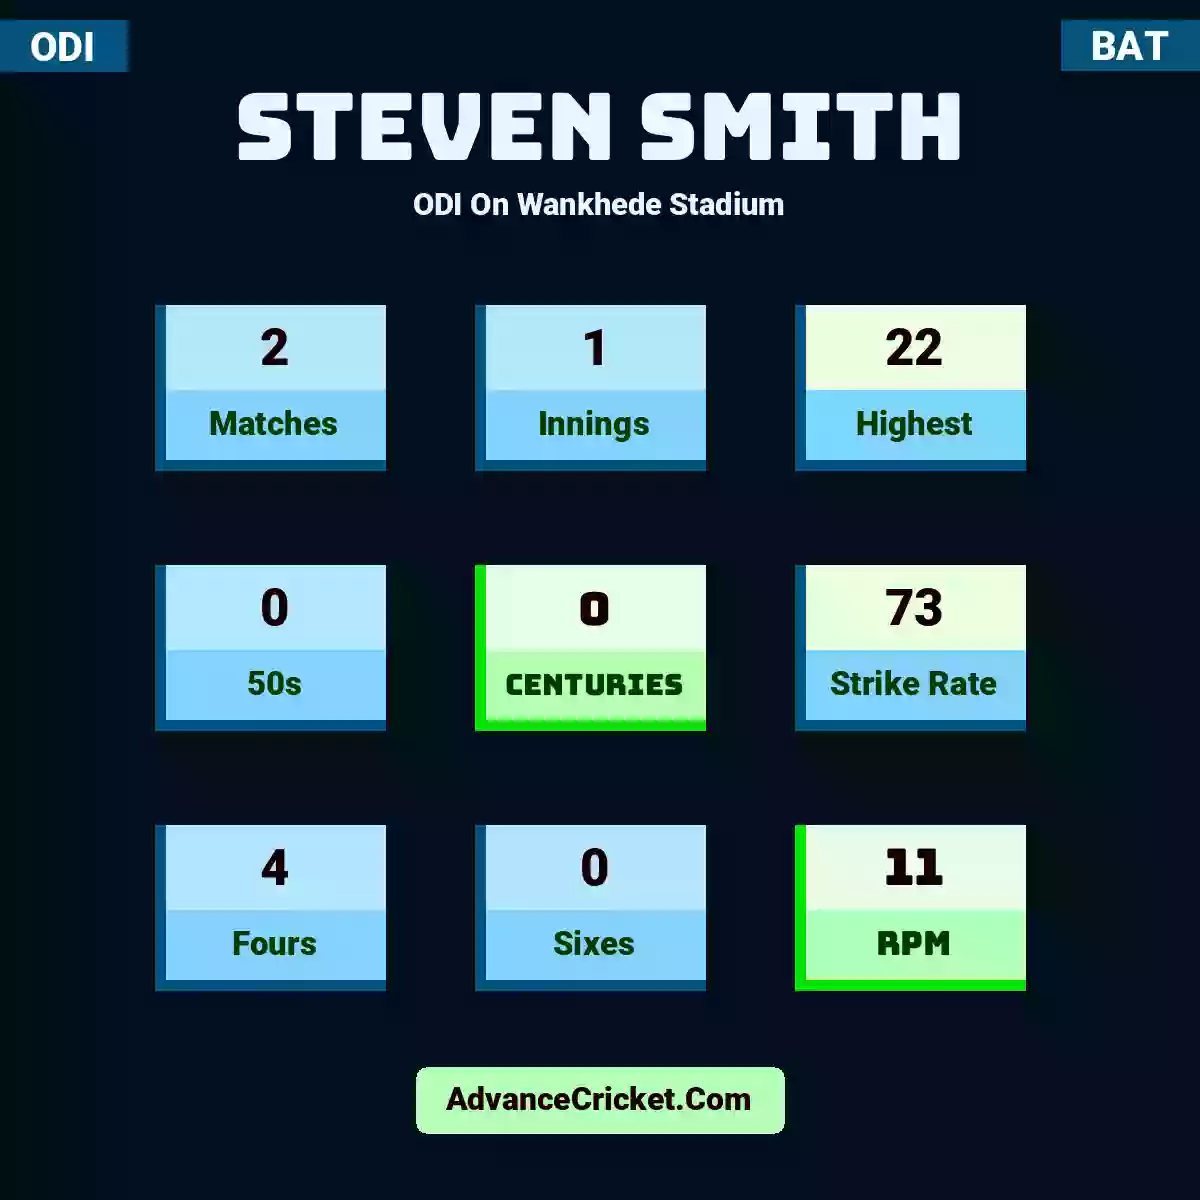 Steven Smith ODI  On Wankhede Stadium, Steven Smith played 2 matches, scored 22 runs as highest, 0 half-centuries, and 0 centuries, with a strike rate of 73. S.Smith hit 4 fours and 0 sixes, with an RPM of 11.